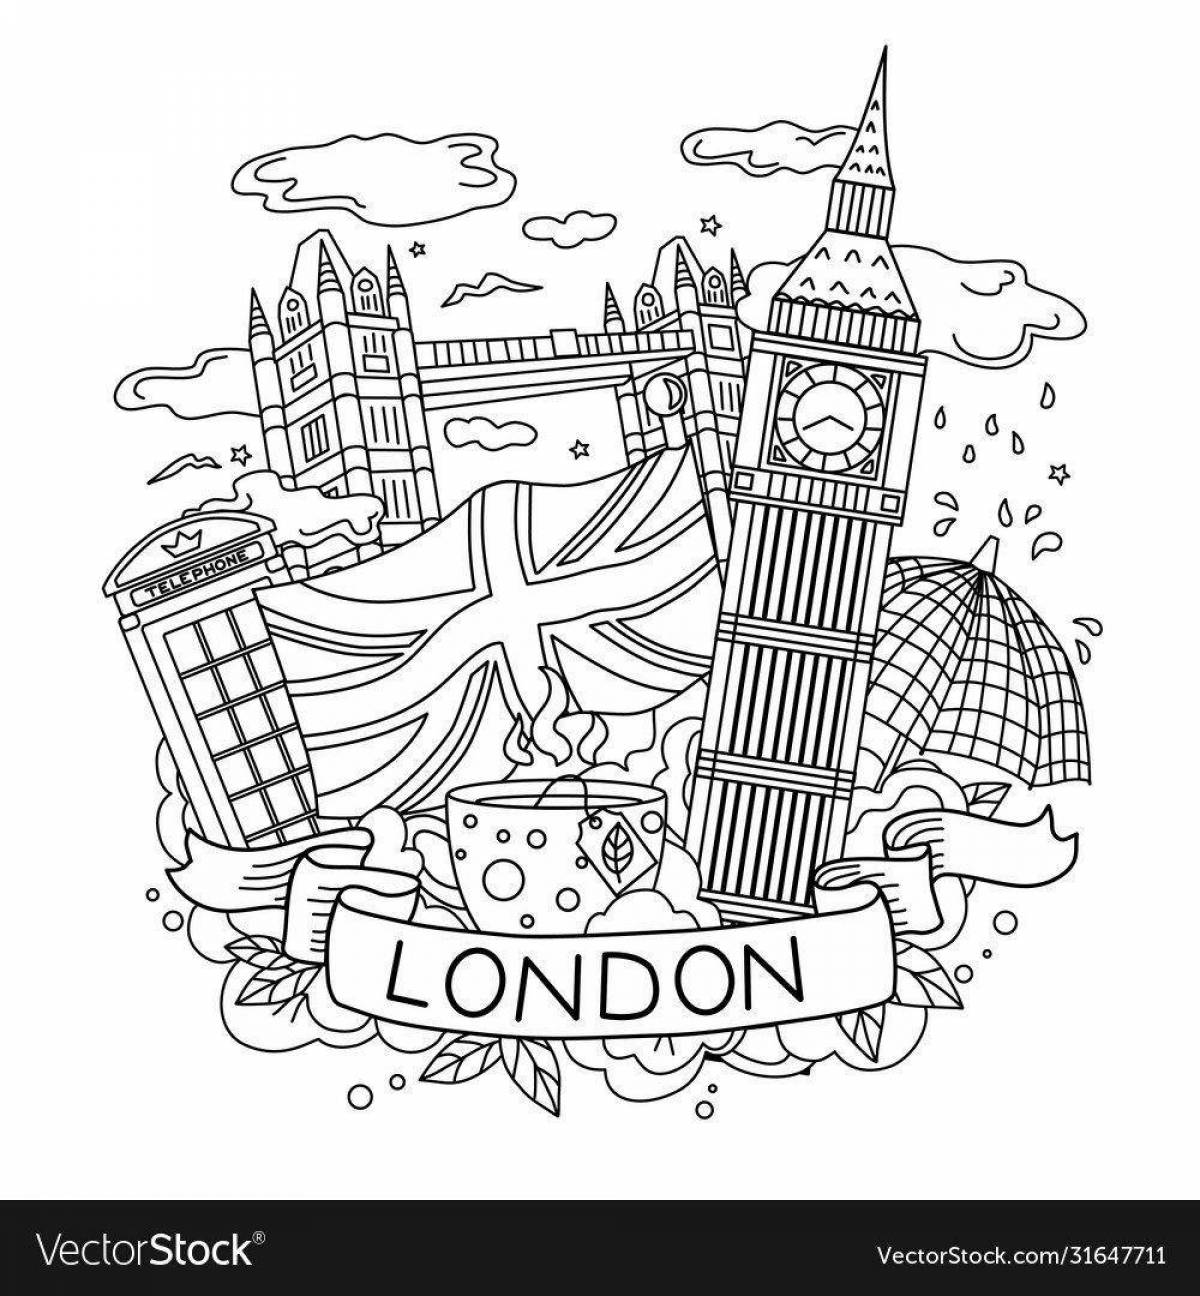 Bright London coloring pages for kids